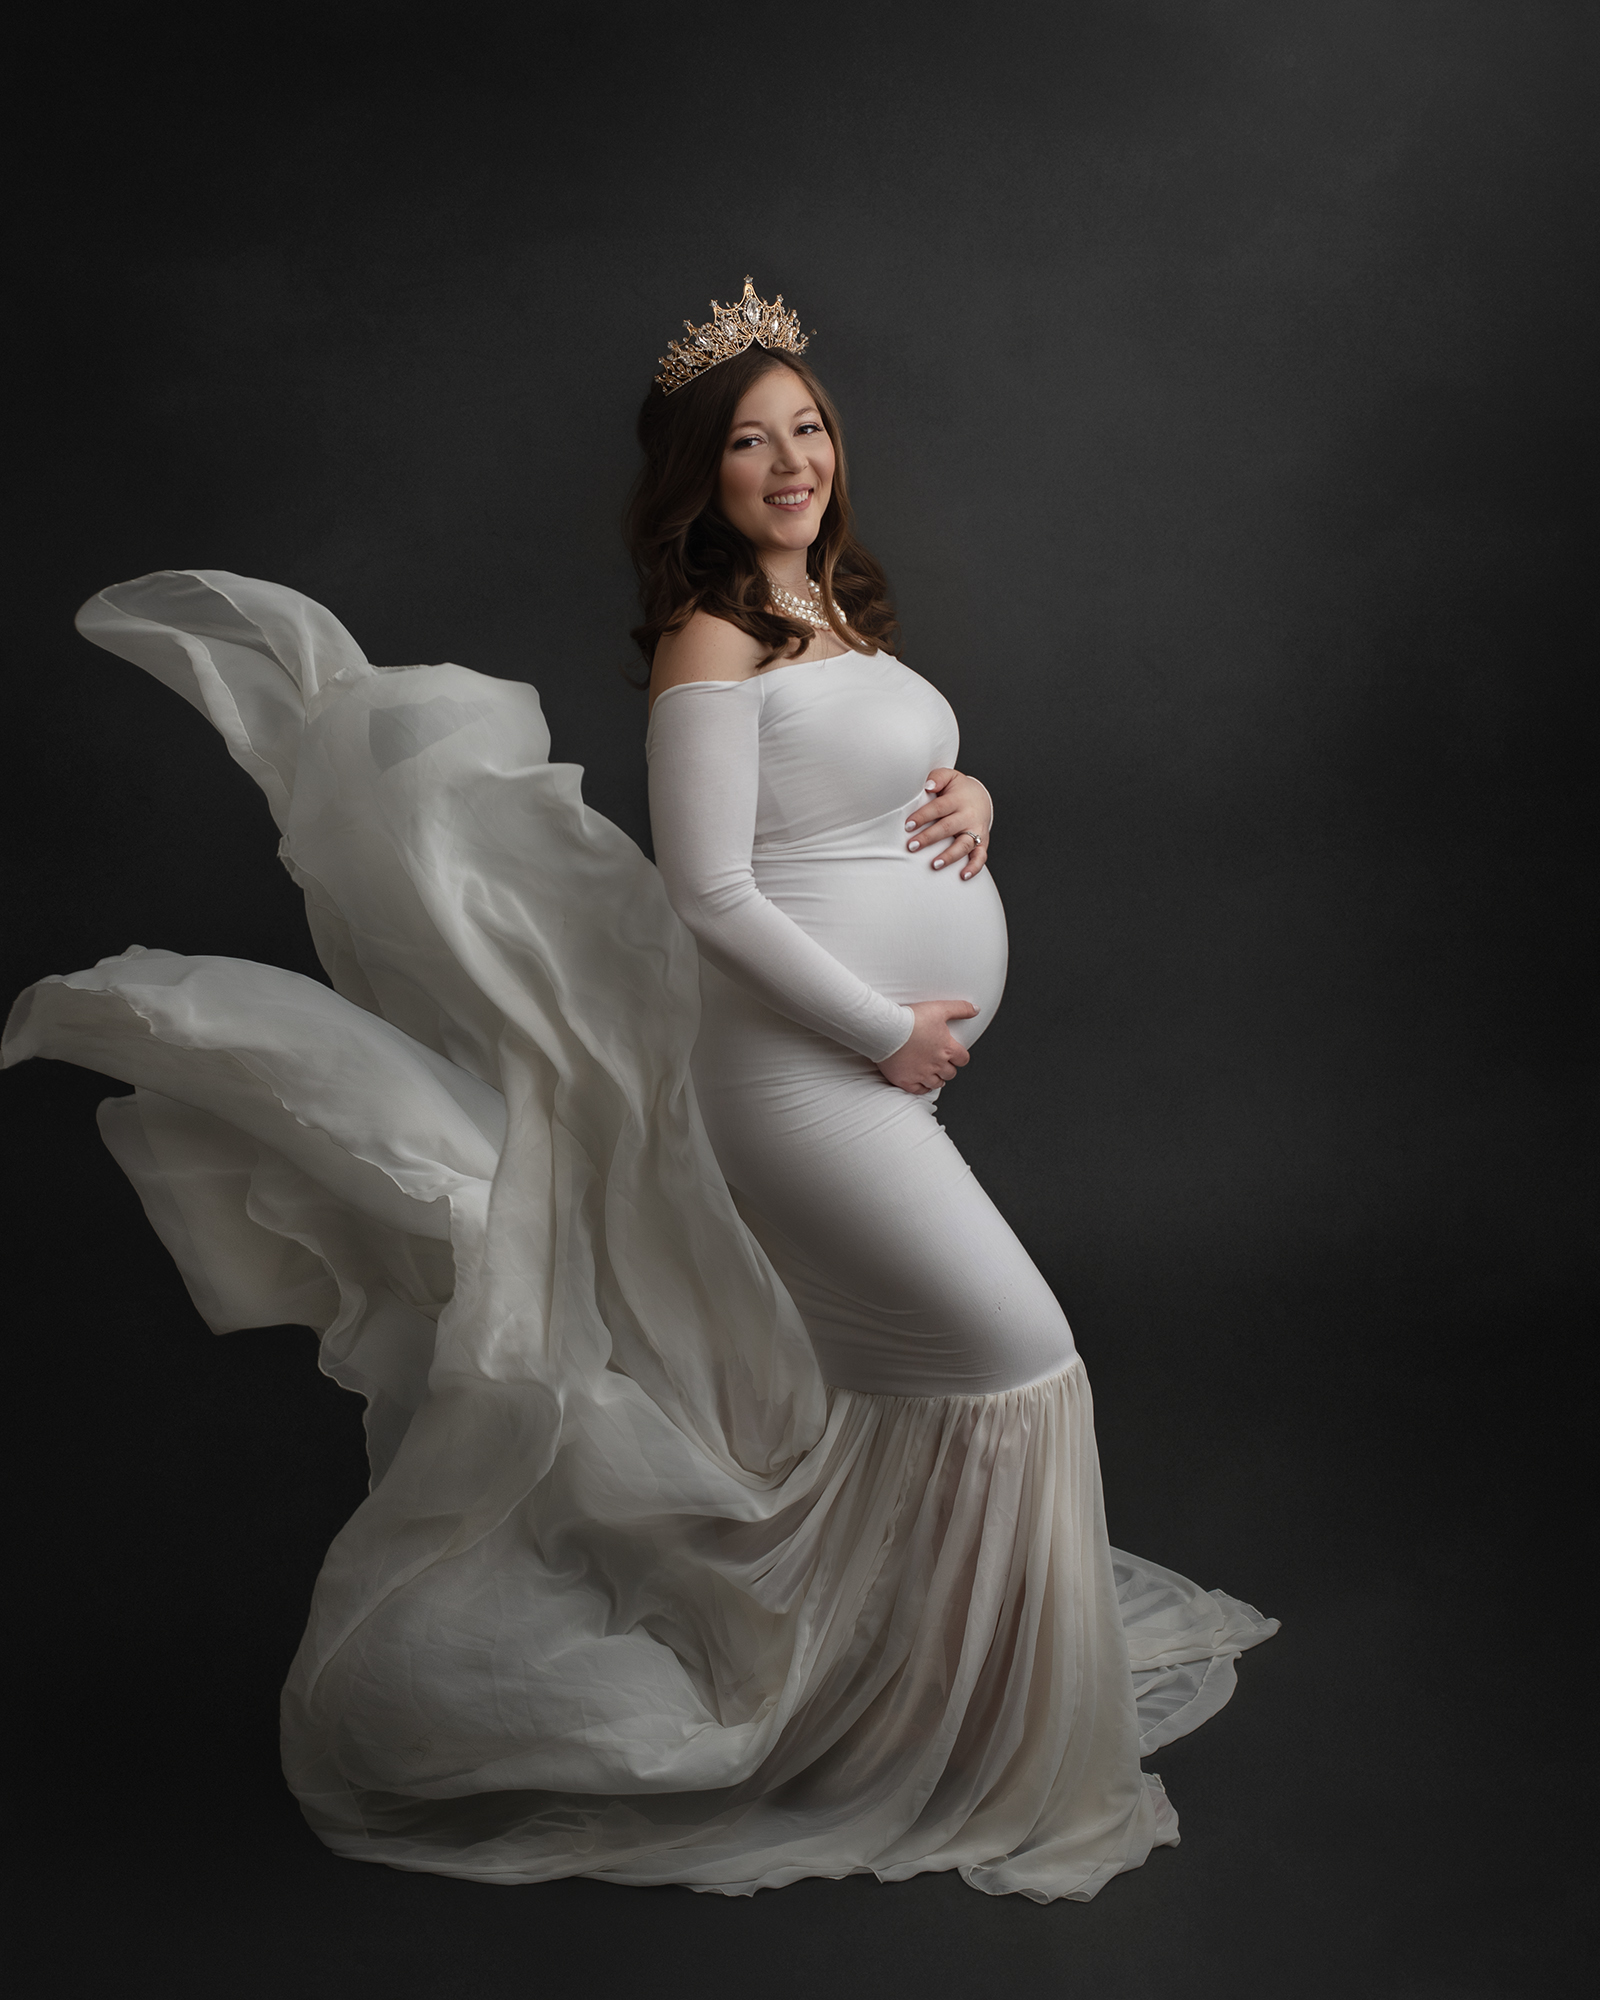 A mom to be in a crown and white maternity gown stands in a studio as the train flows in the wind behind her st louis baby shower venues